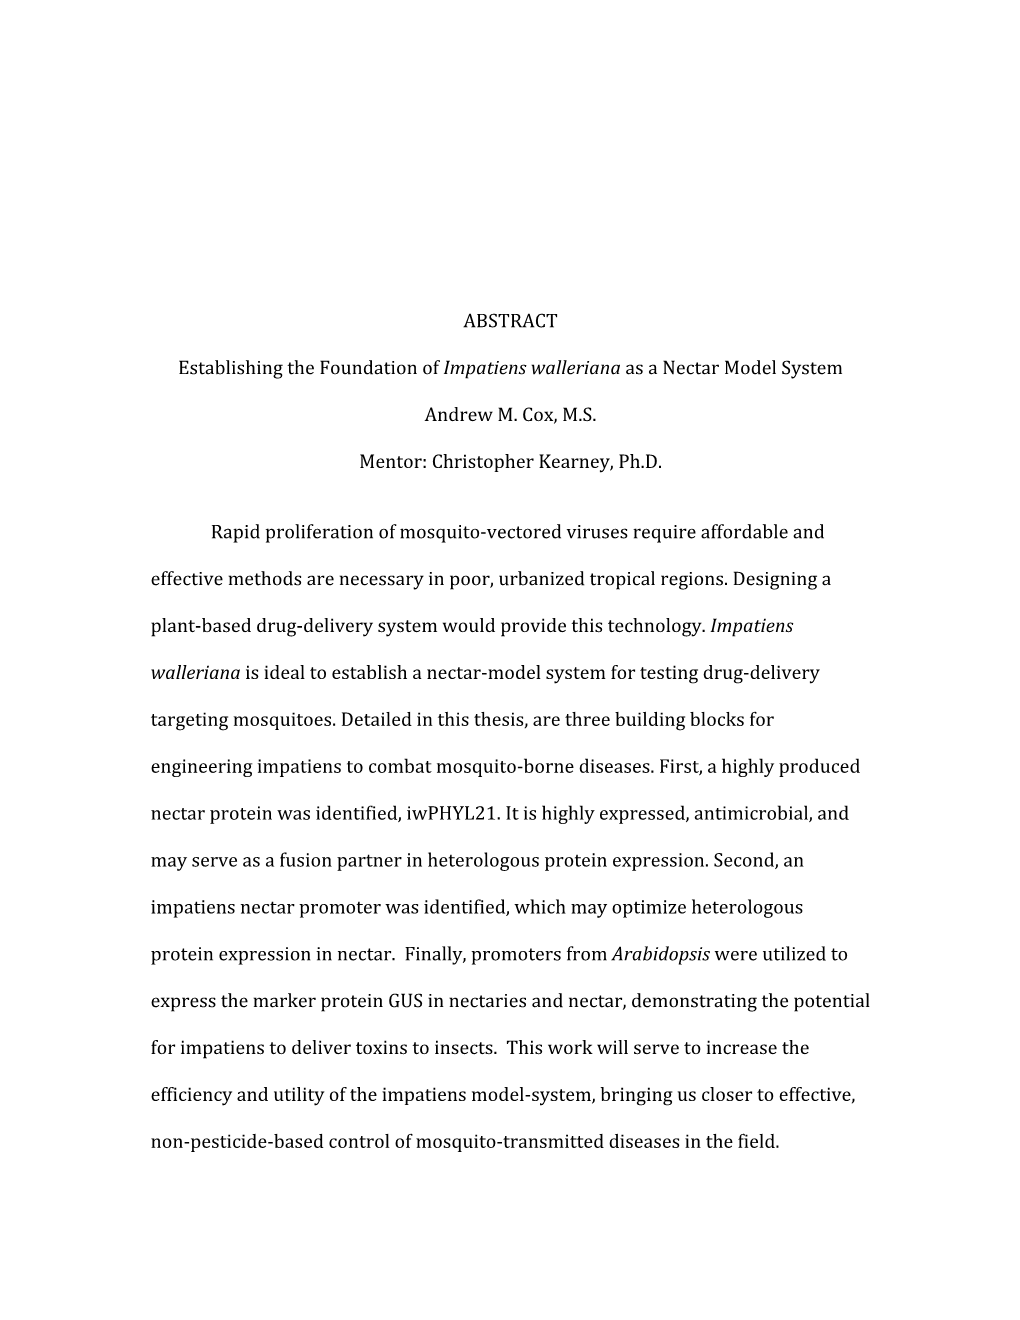 ABSTRACT Establishing the Foundation of Impatiens Walleriana As a Nectar Model System Andrew M. Cox, M.S. Mentor: Christopher